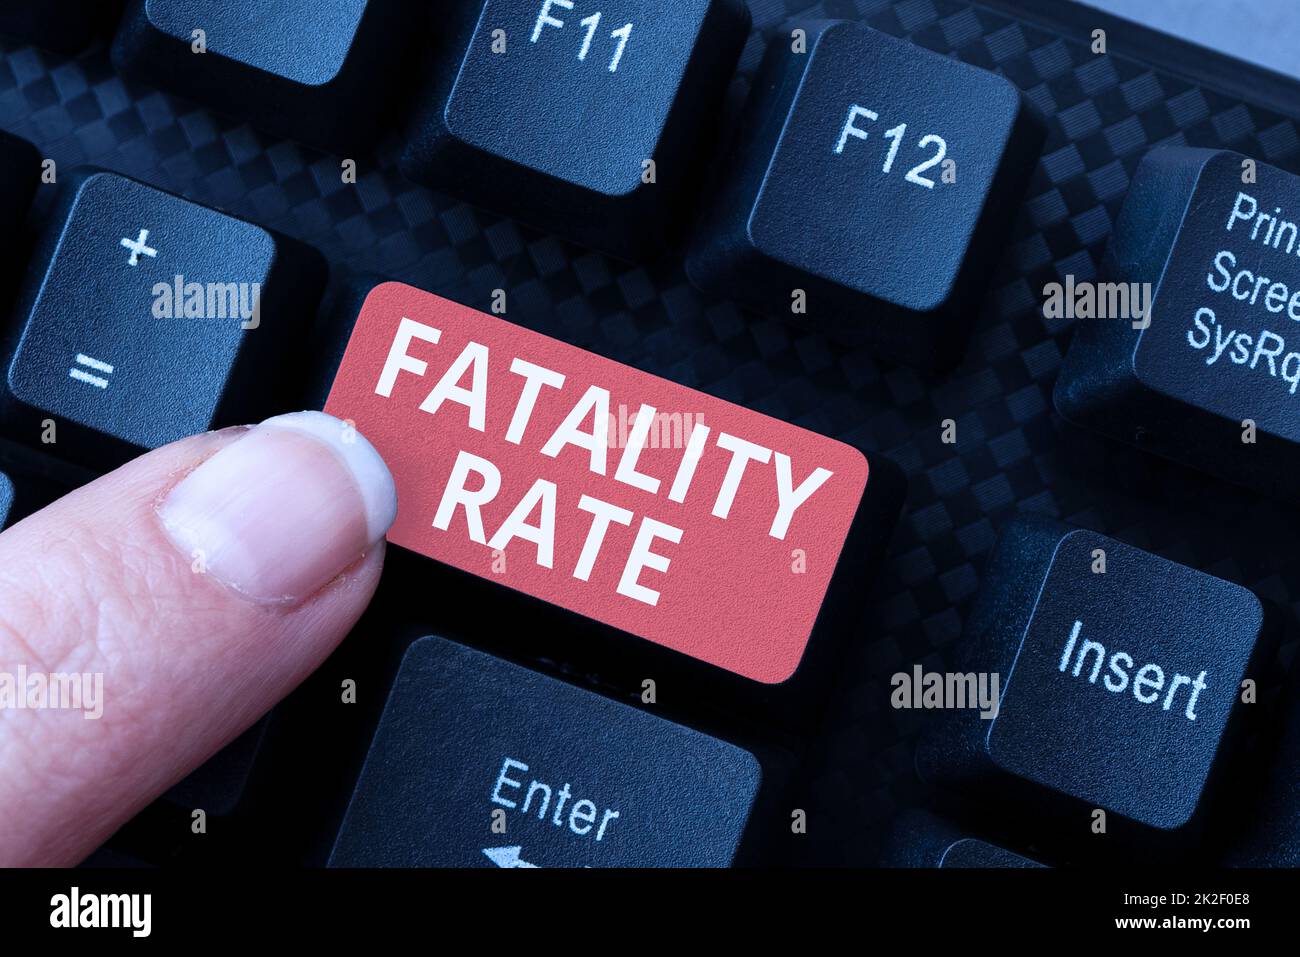 Inspiration showing sign Fatality Rate. Business idea calculated number of deaths over a specific range of period Downloading Online Files And Data, Uploading Programming Codes Stock Photo